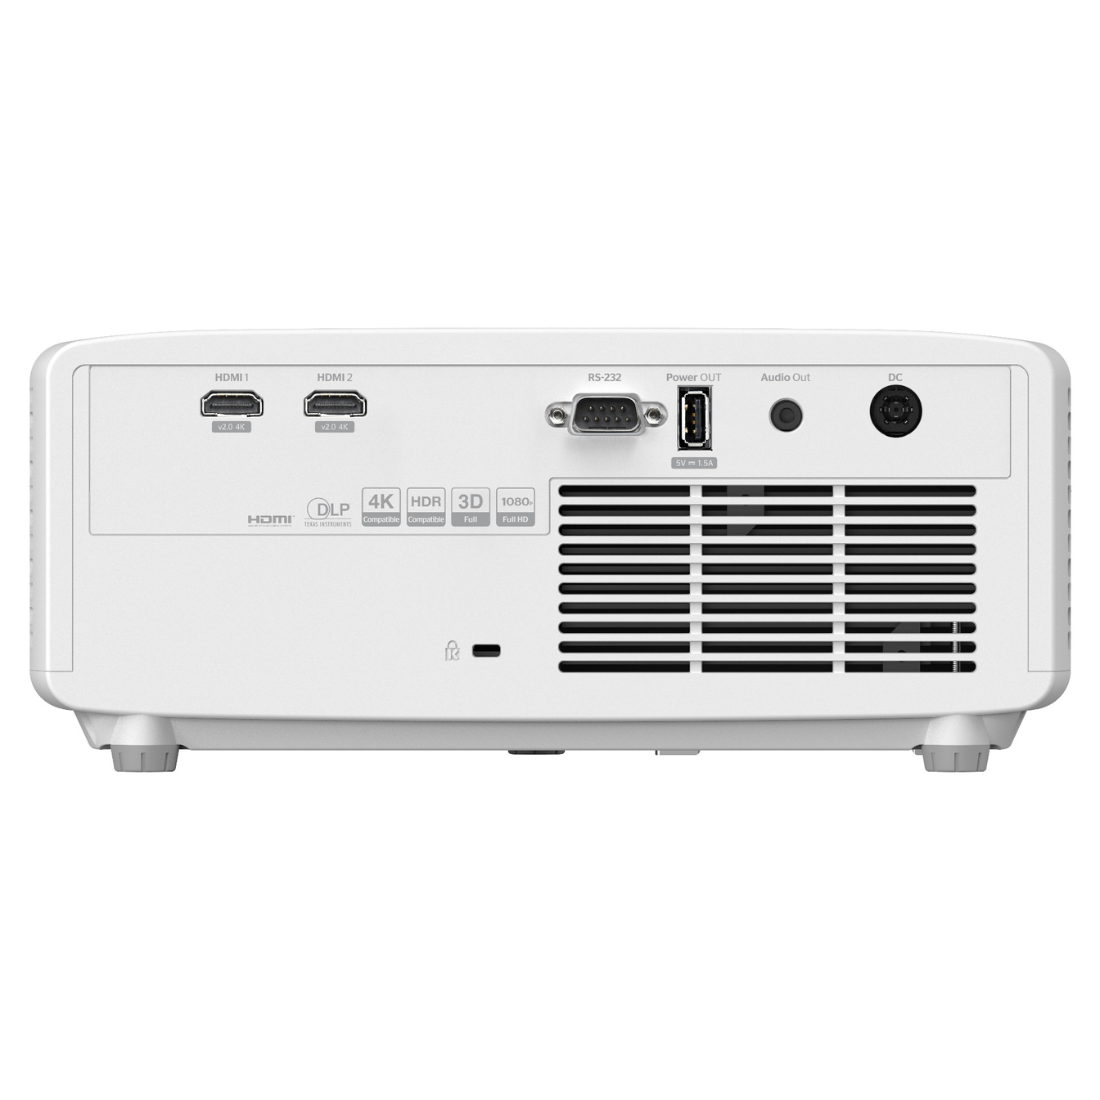 Optoma GT2000HDR Laser Projector